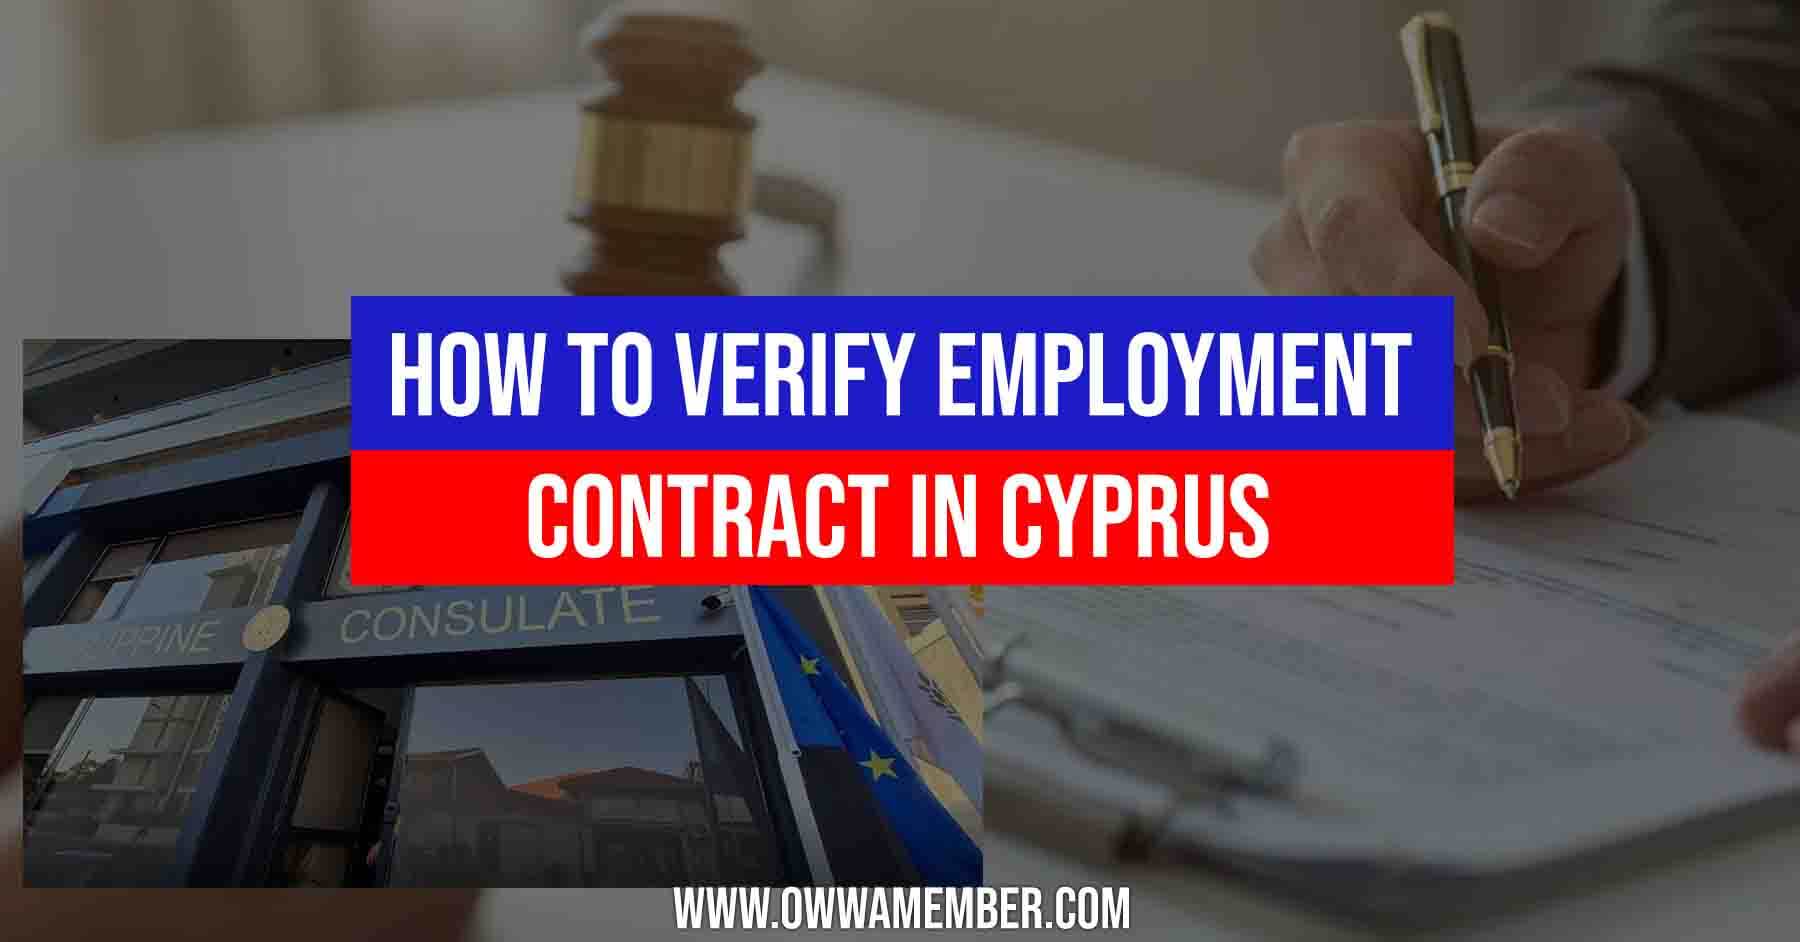 contract verification process in cyprus